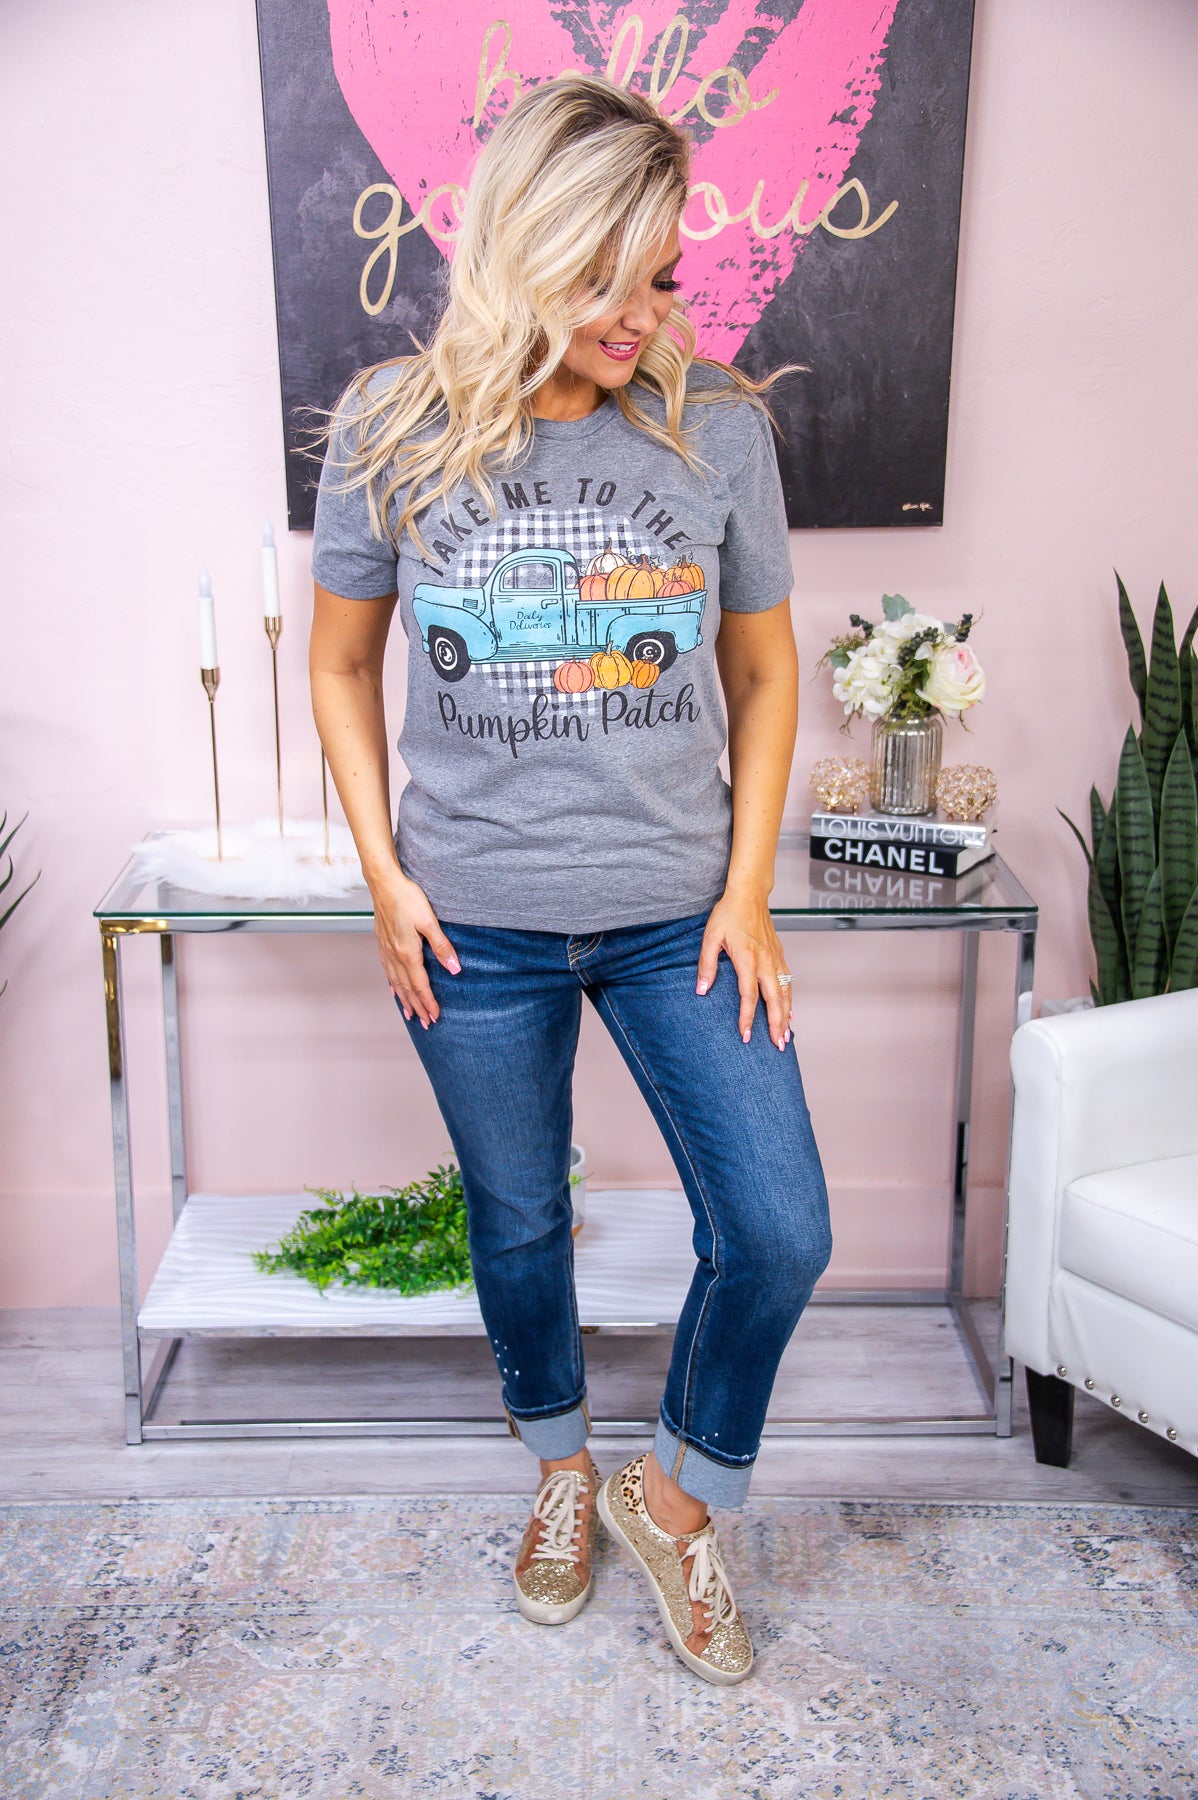 Tee for The Soul Take Me to The Pumpkin Patch Premium Heather Gray Graphic Tee - A2894PHG Small